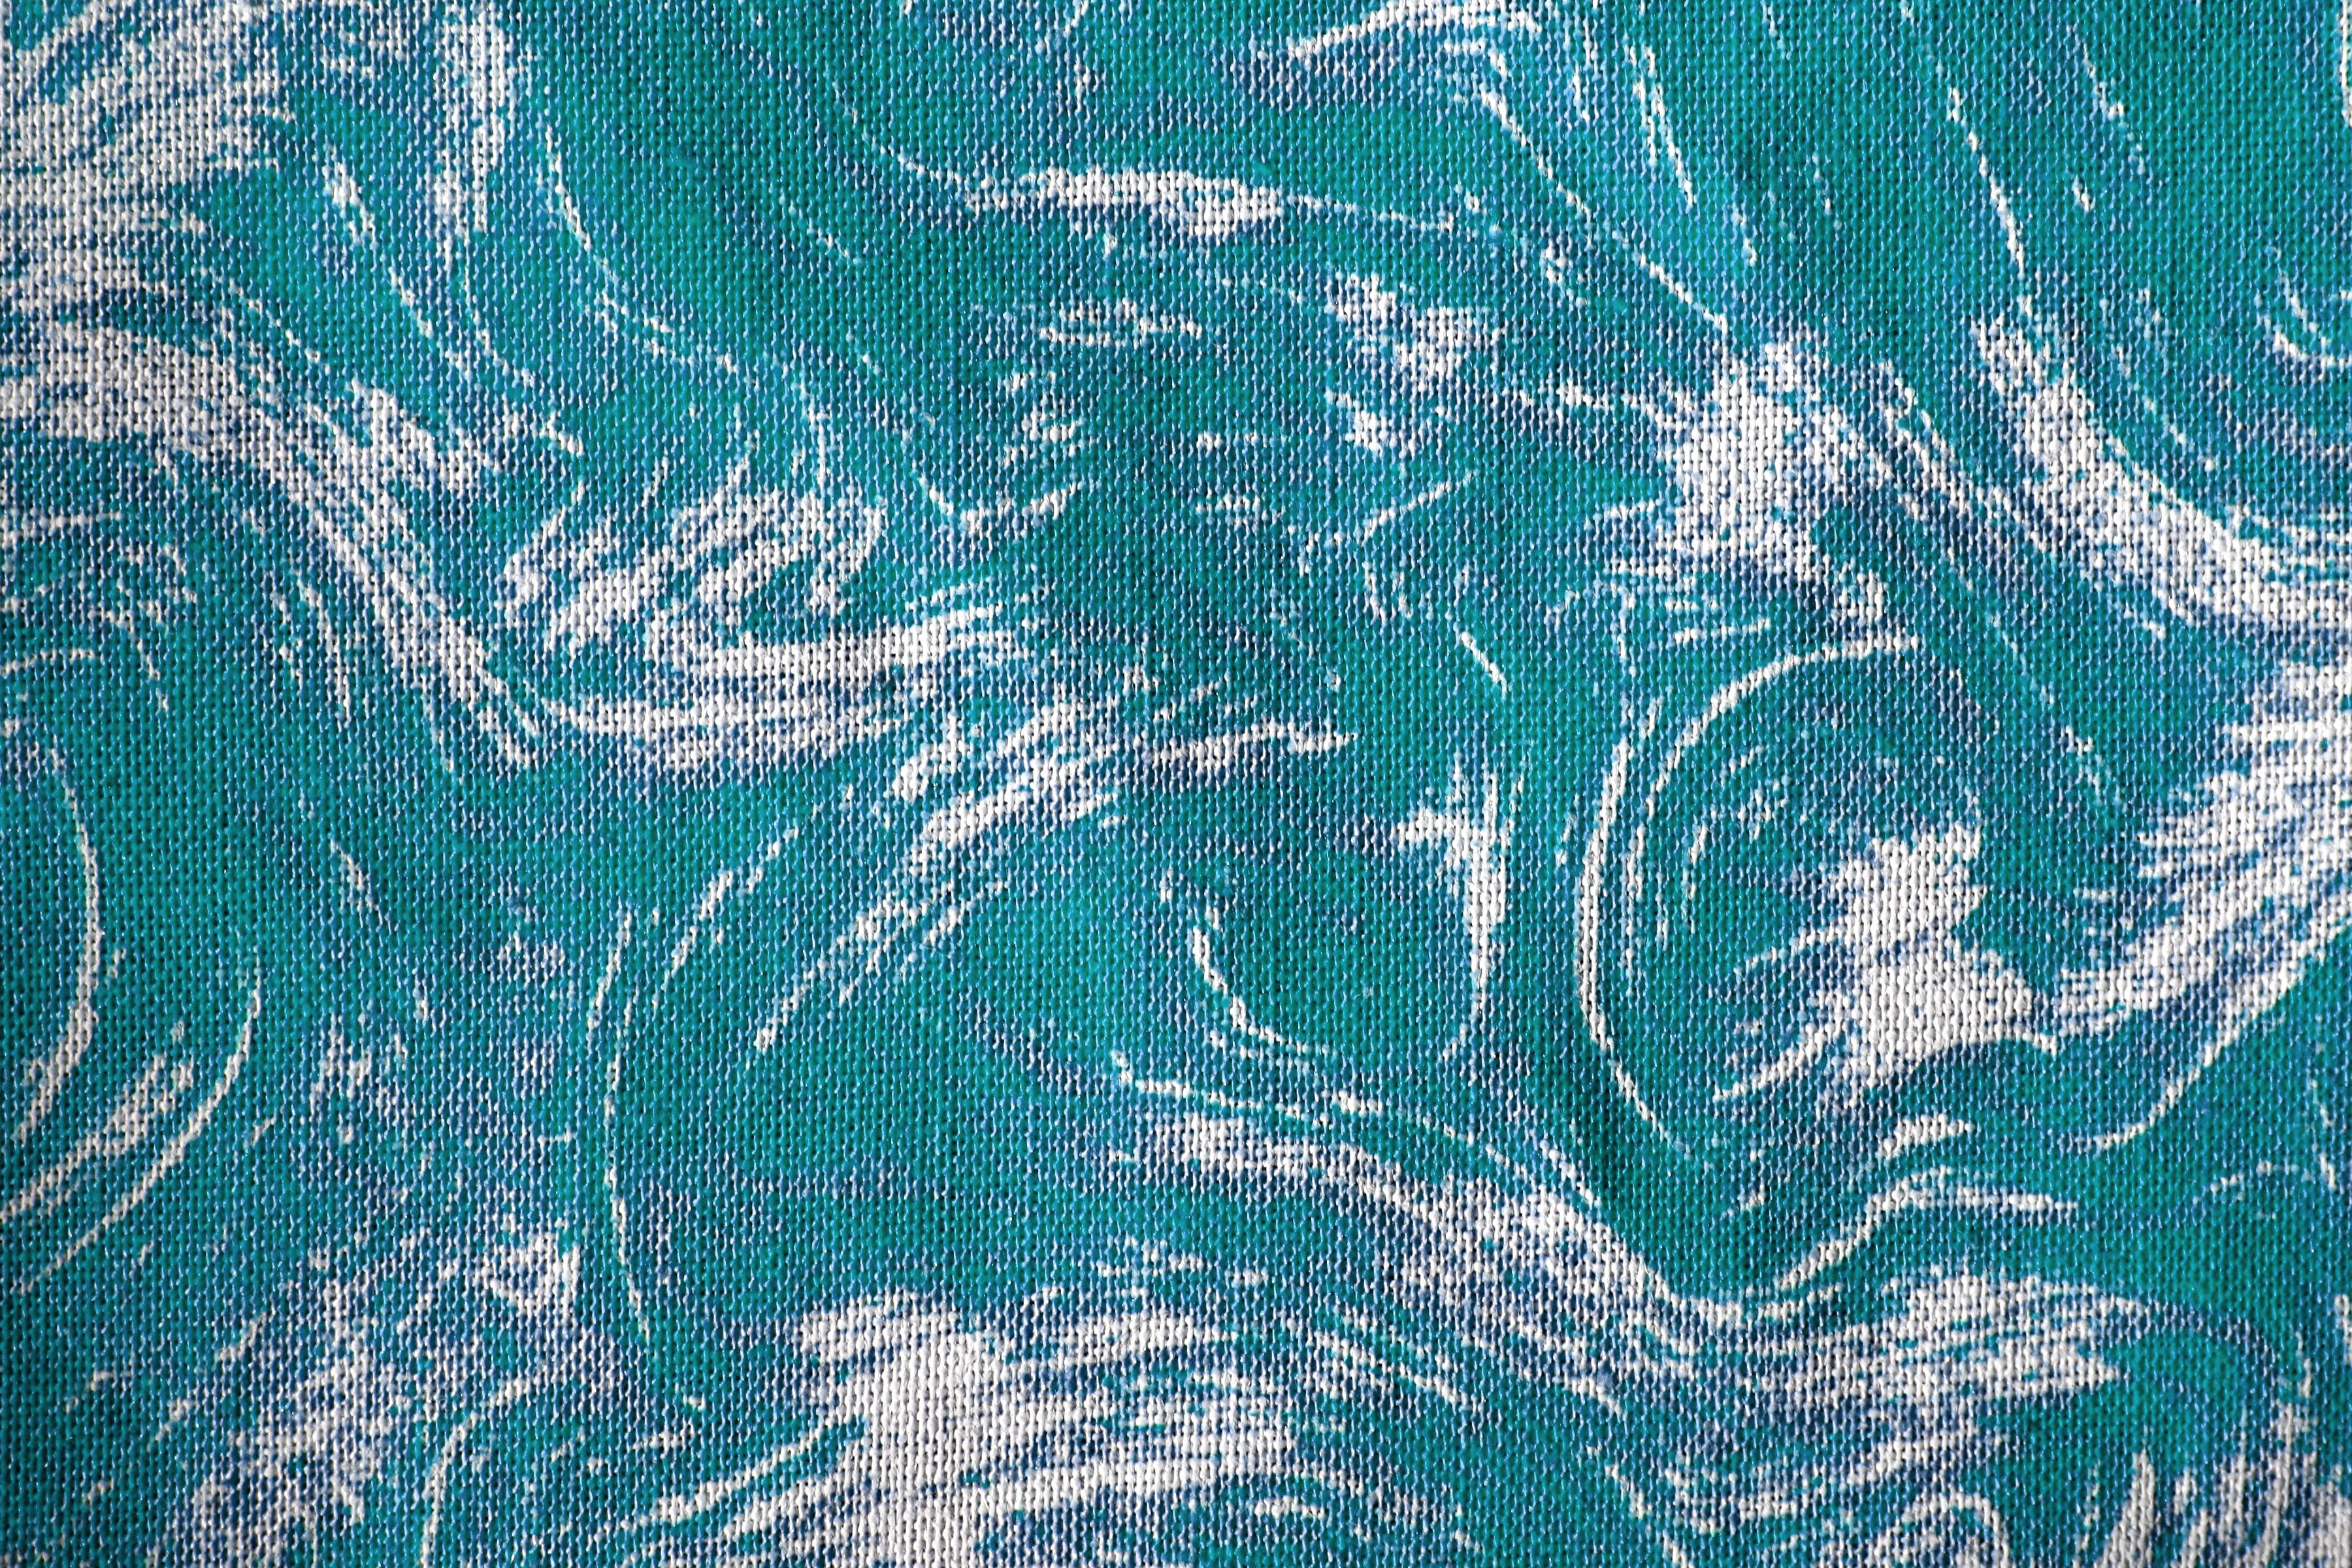 Fabric Texture With Teal Swirl Pattern Picture Free Photograph